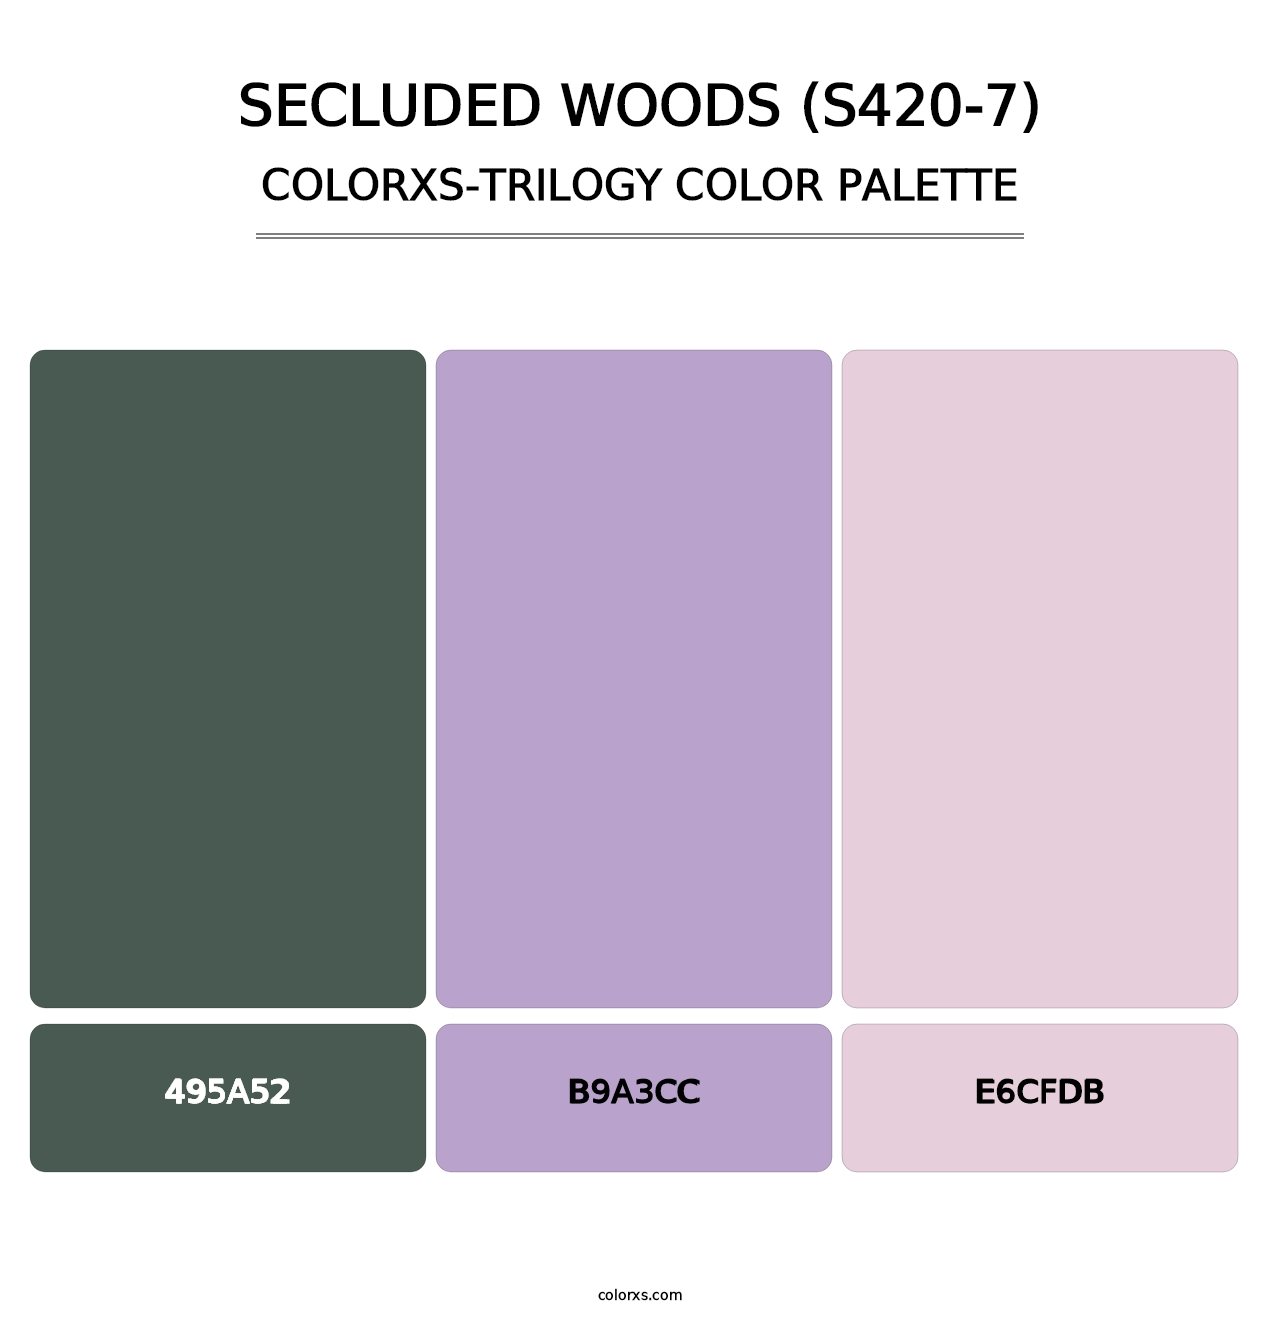 Secluded Woods (S420-7) - Colorxs Trilogy Palette